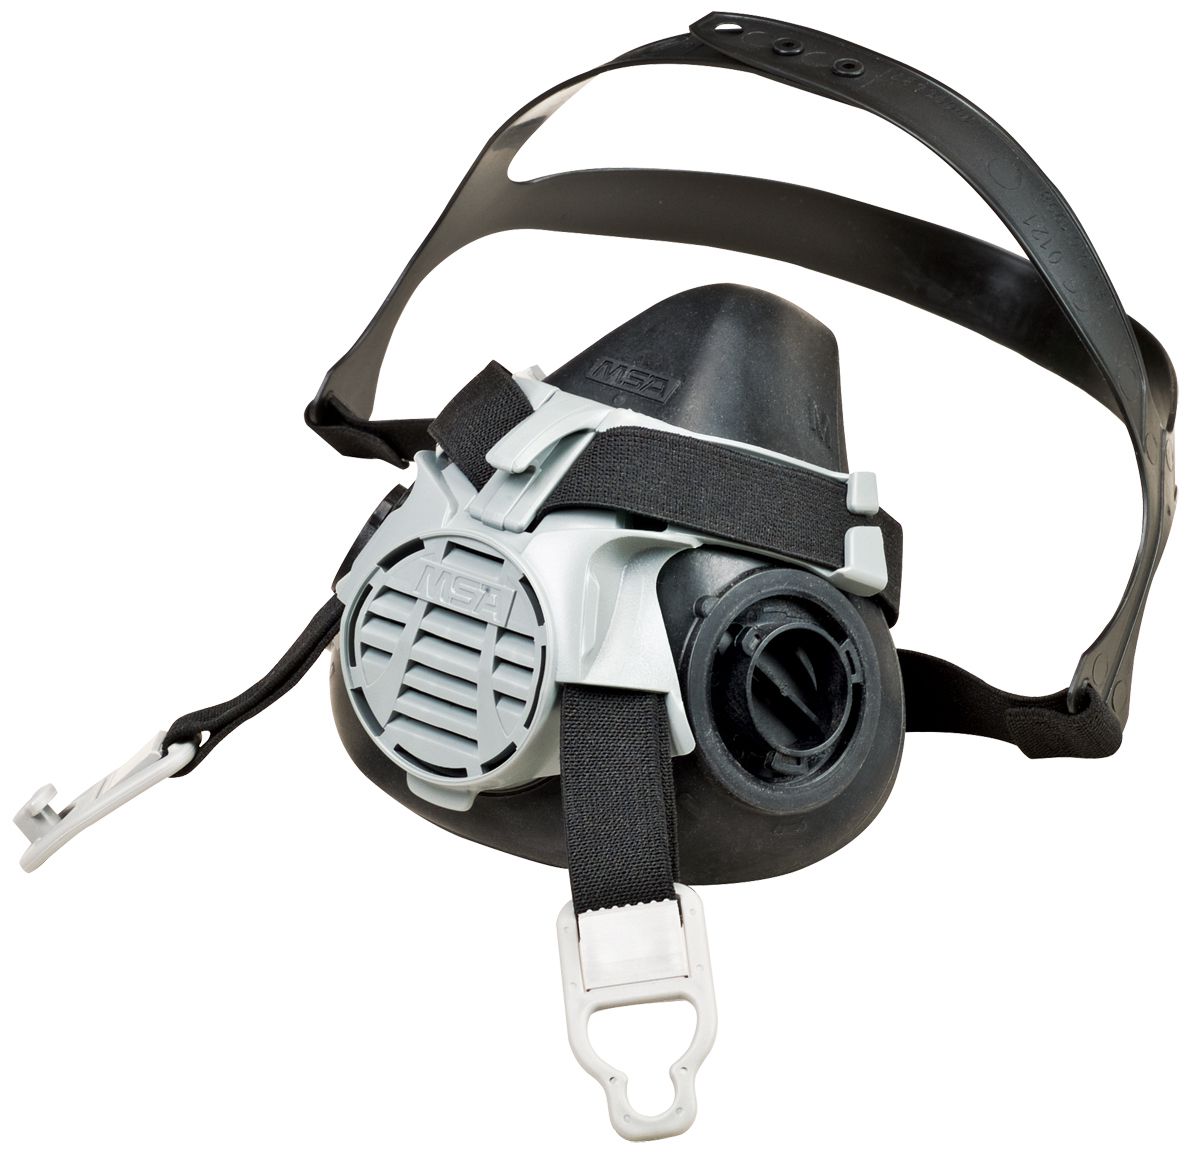 MSA Advantage 400 half mask - respiratory protection against viruses, particles, gases & Co.